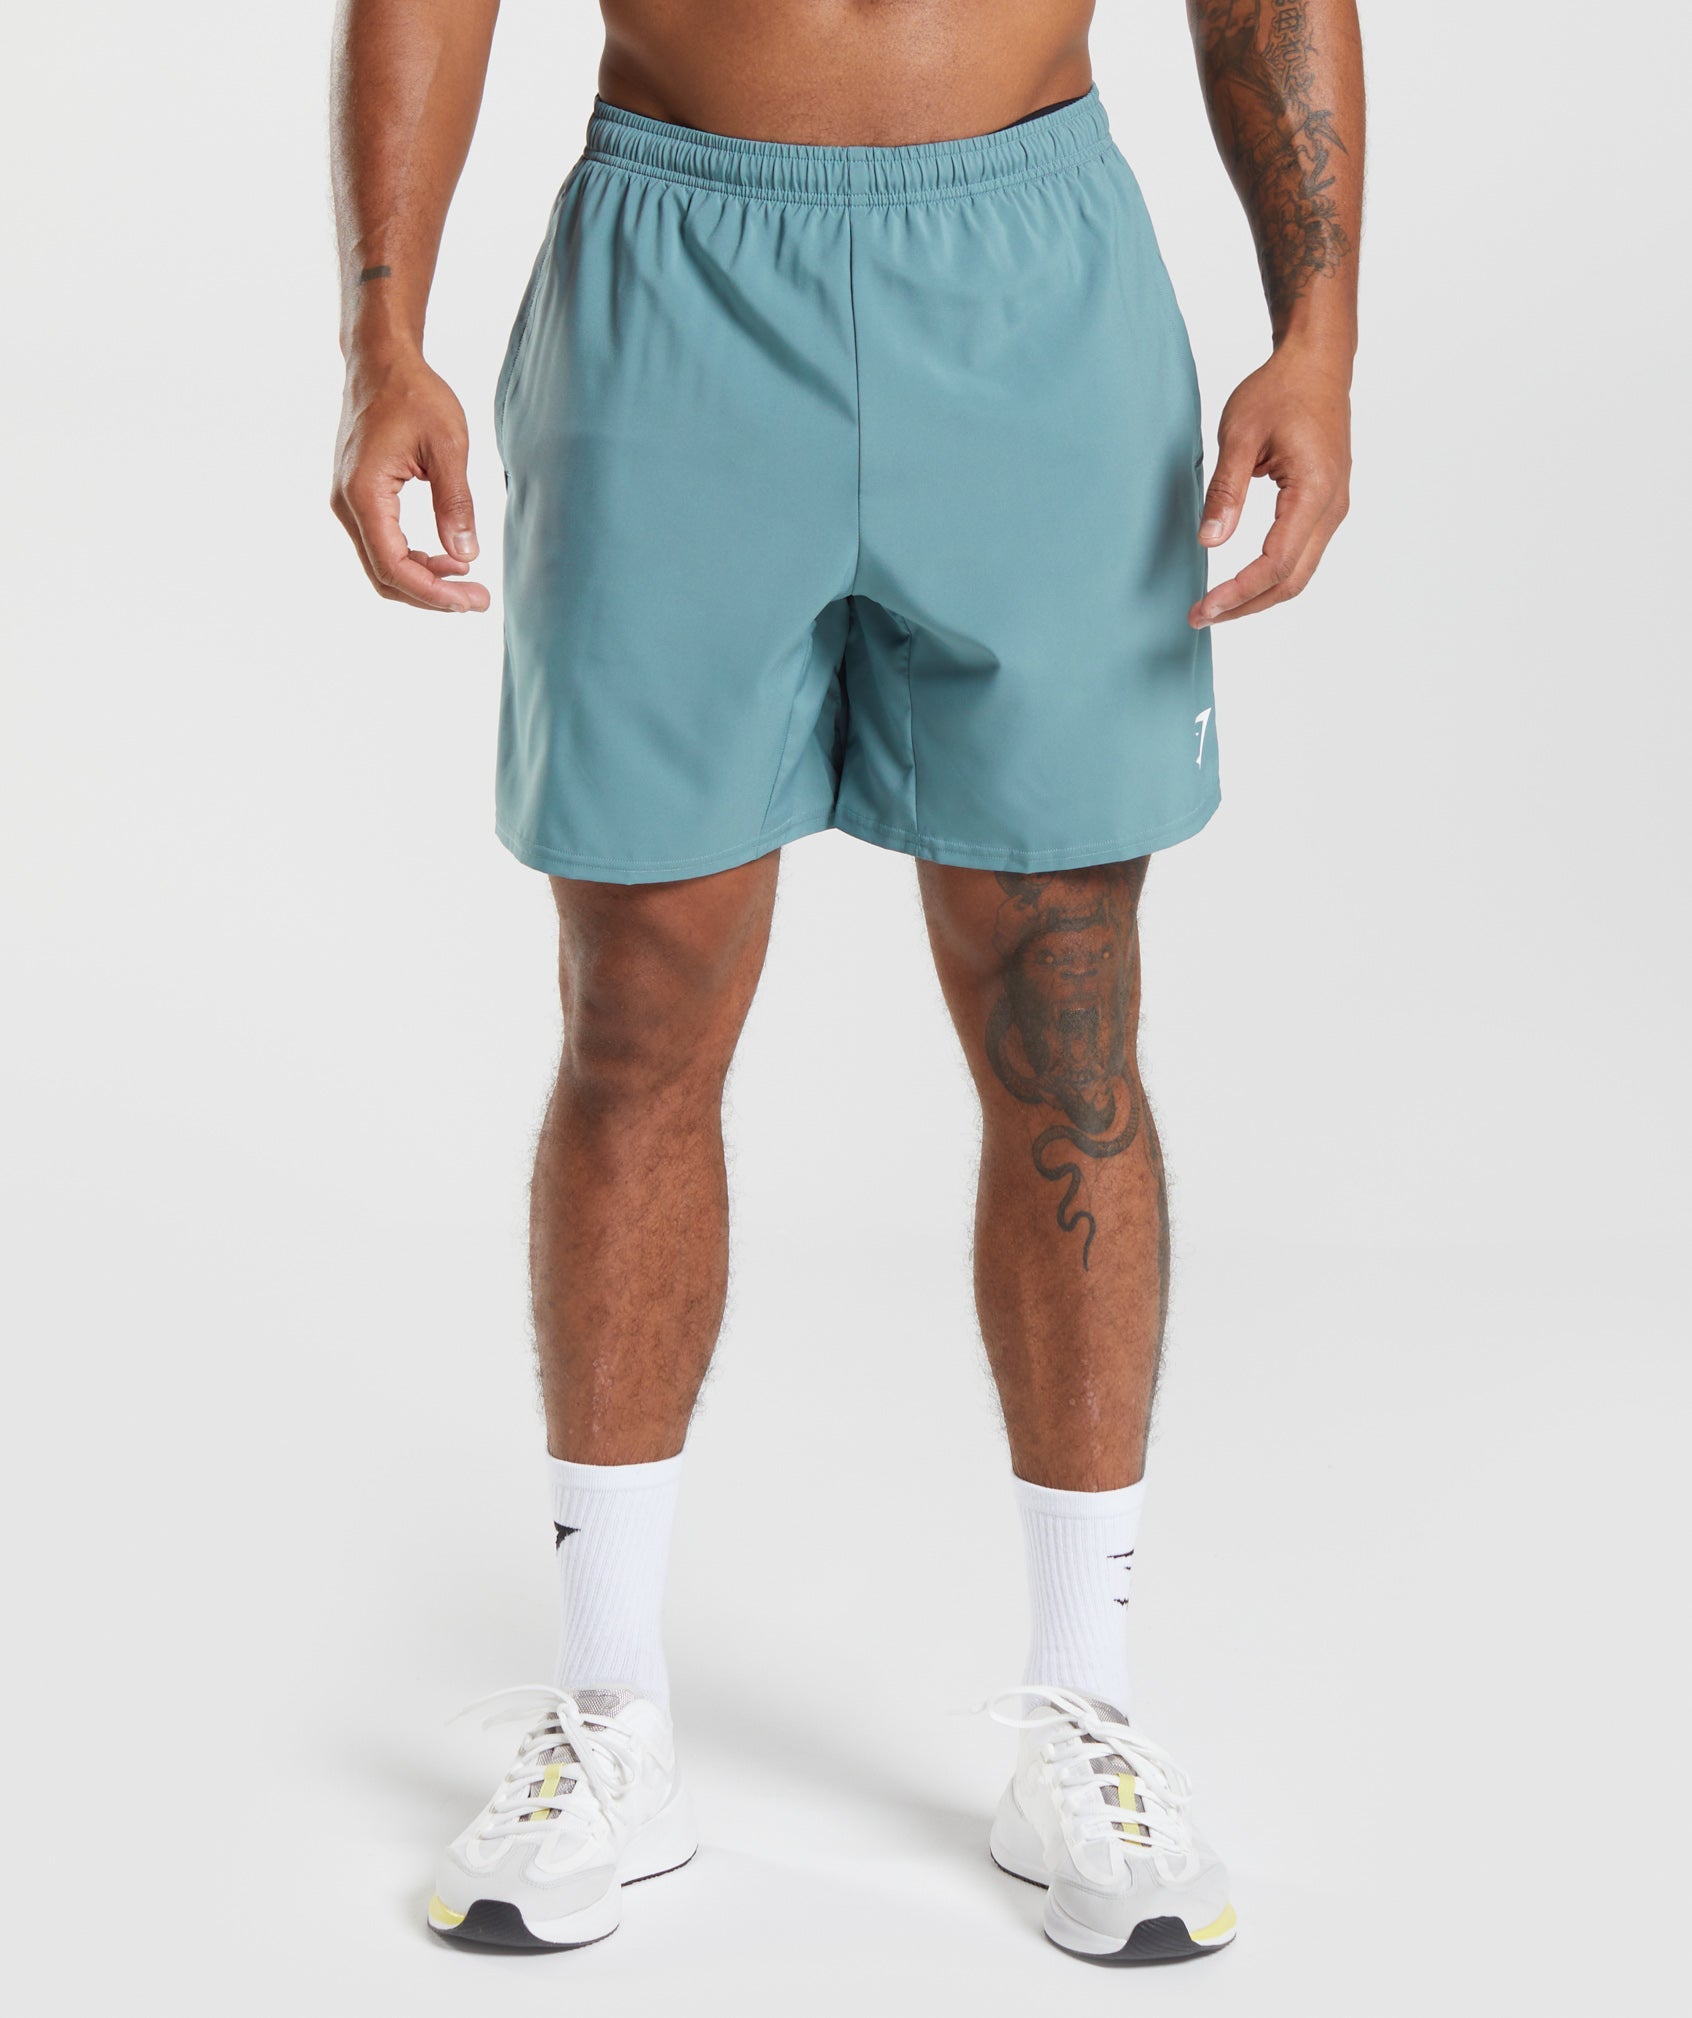 Arrival 7" Shorts in Thunder Blue